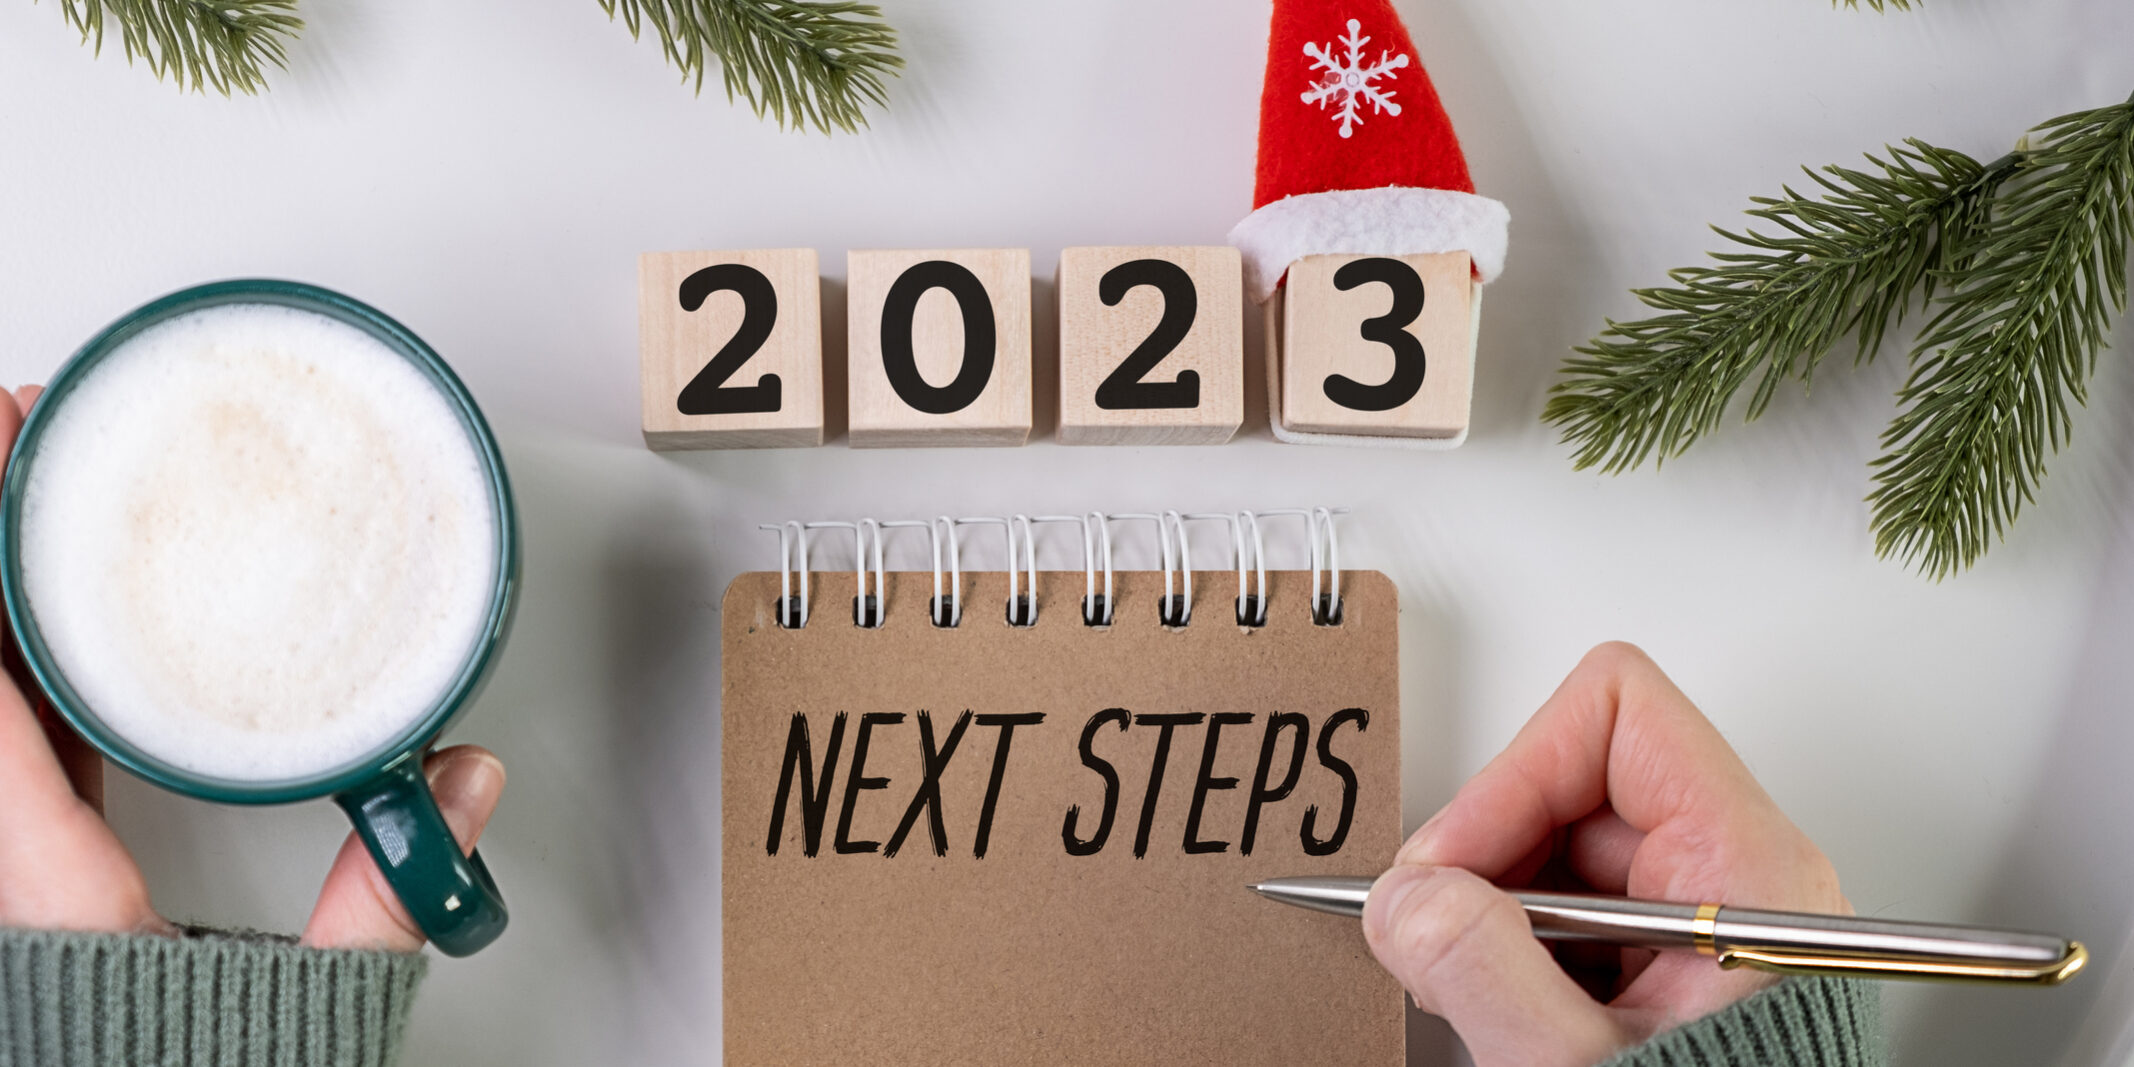 Examine your financial plans in the new year